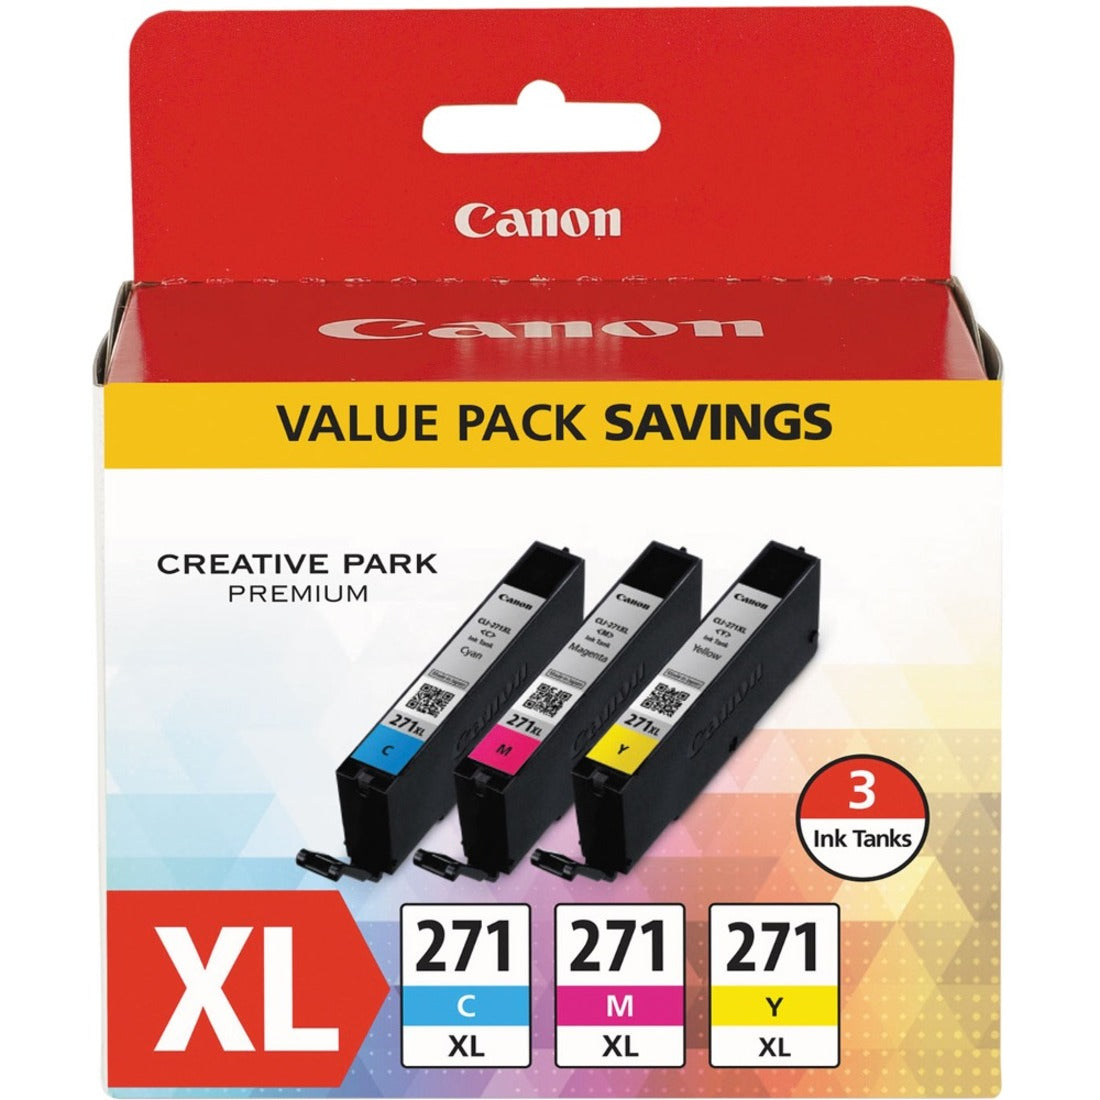 Canon 0337C005 CLI-271 XL Cyan, Magenta & Yellow 3 Ink Pack - Genuine Canon Ink Cartridge